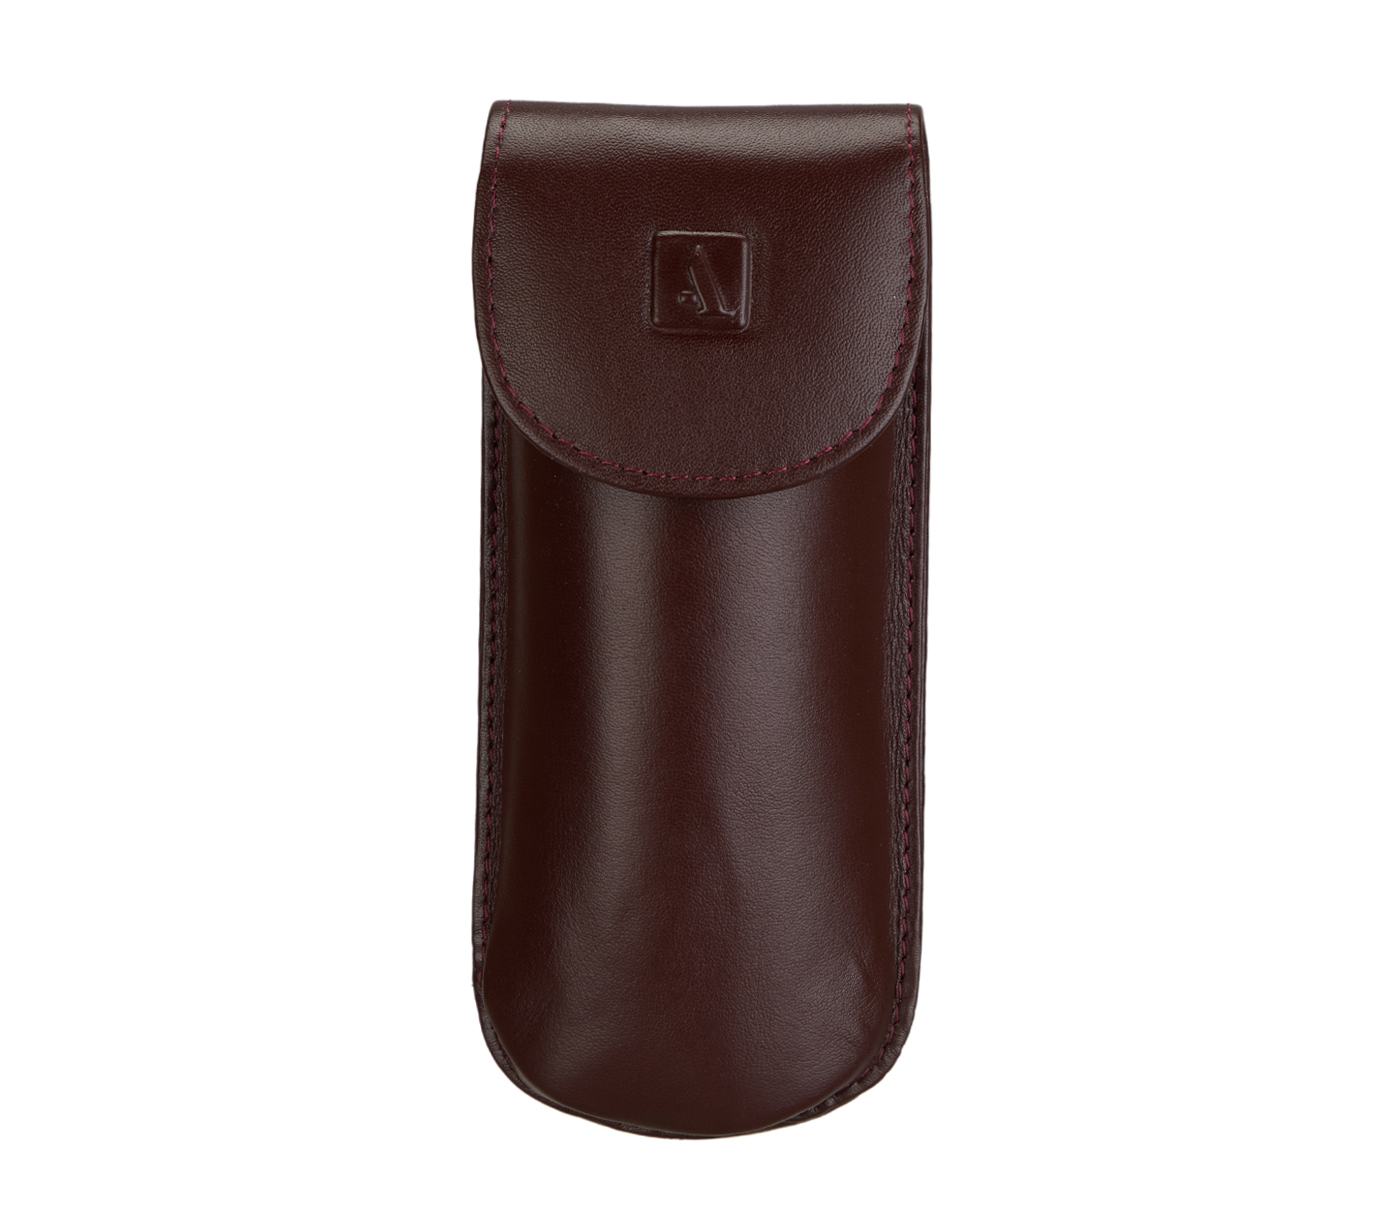 W74--Reading spectacle semi hard case in Genuine Leather - Wine